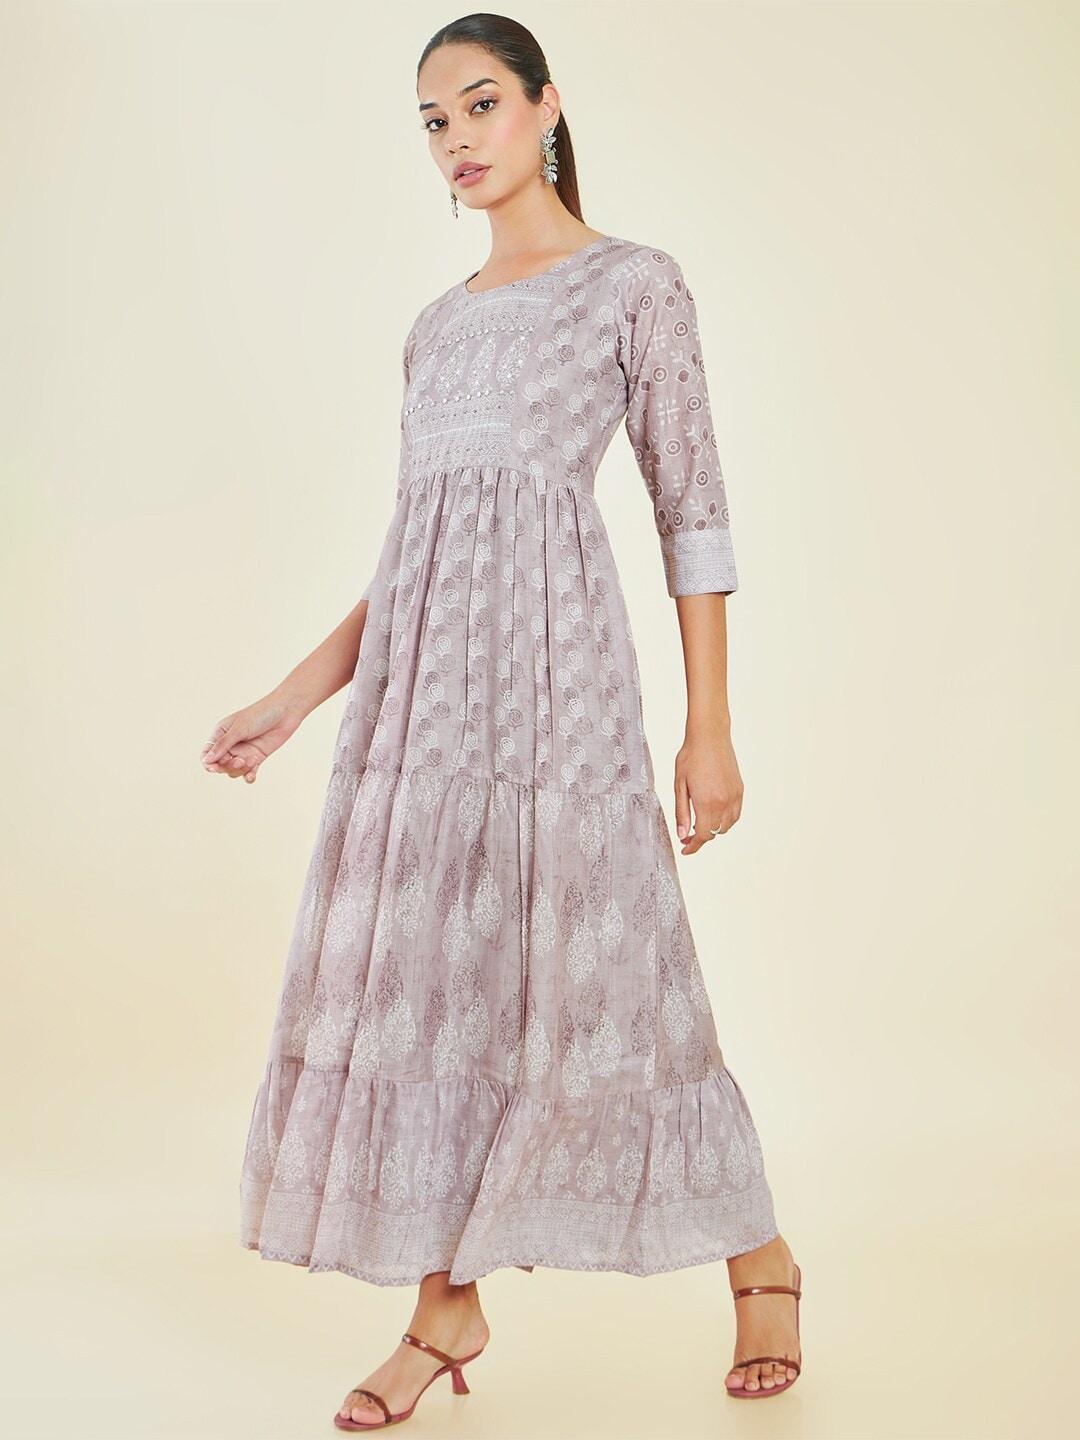 Soch Grey Ethnic Motif Printed Embellished Tiered Fit & Flare Maxi Ethnic Dress